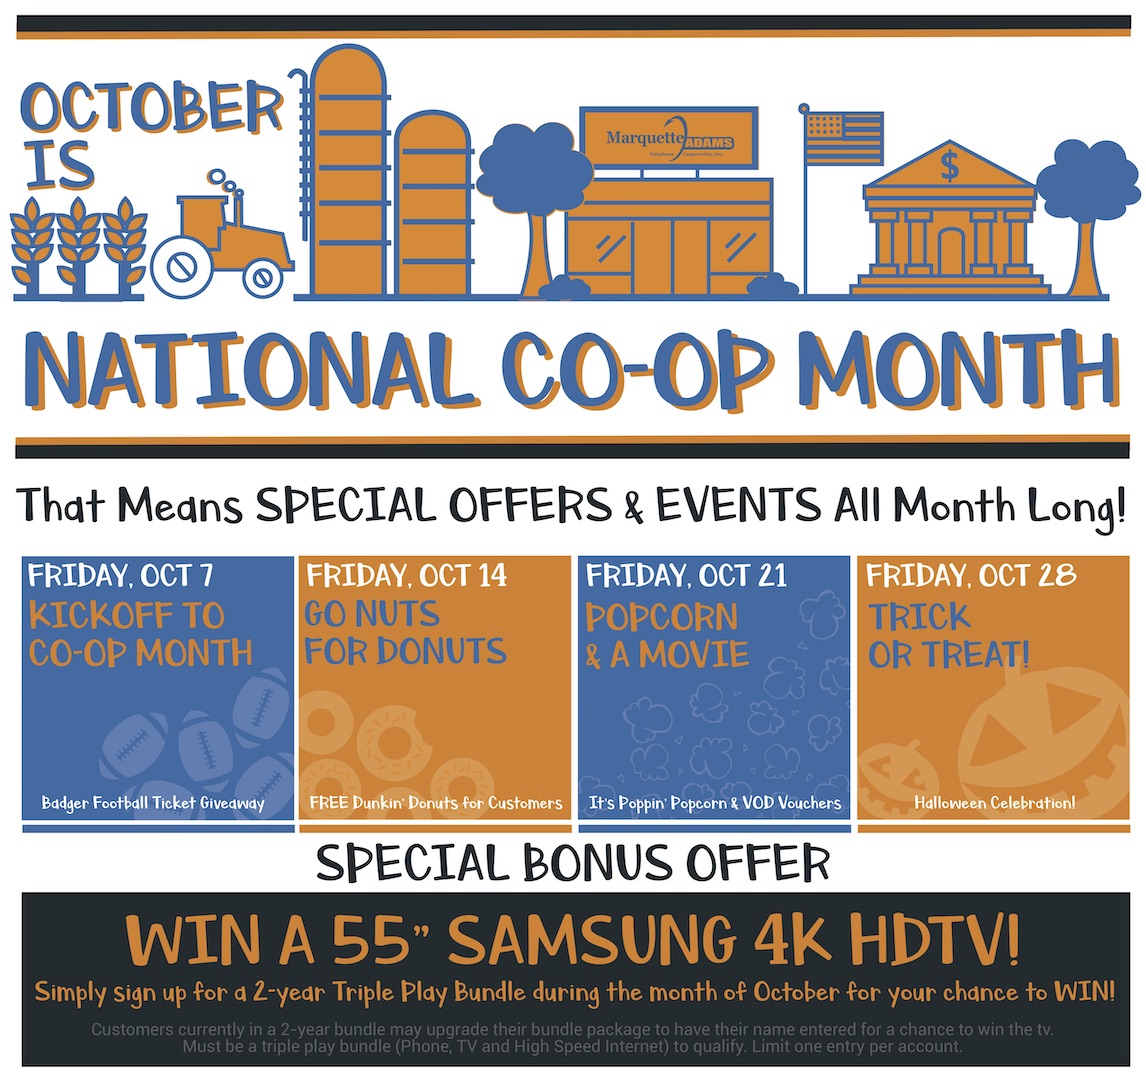 Co-op Month Specials - Download Graphics to View